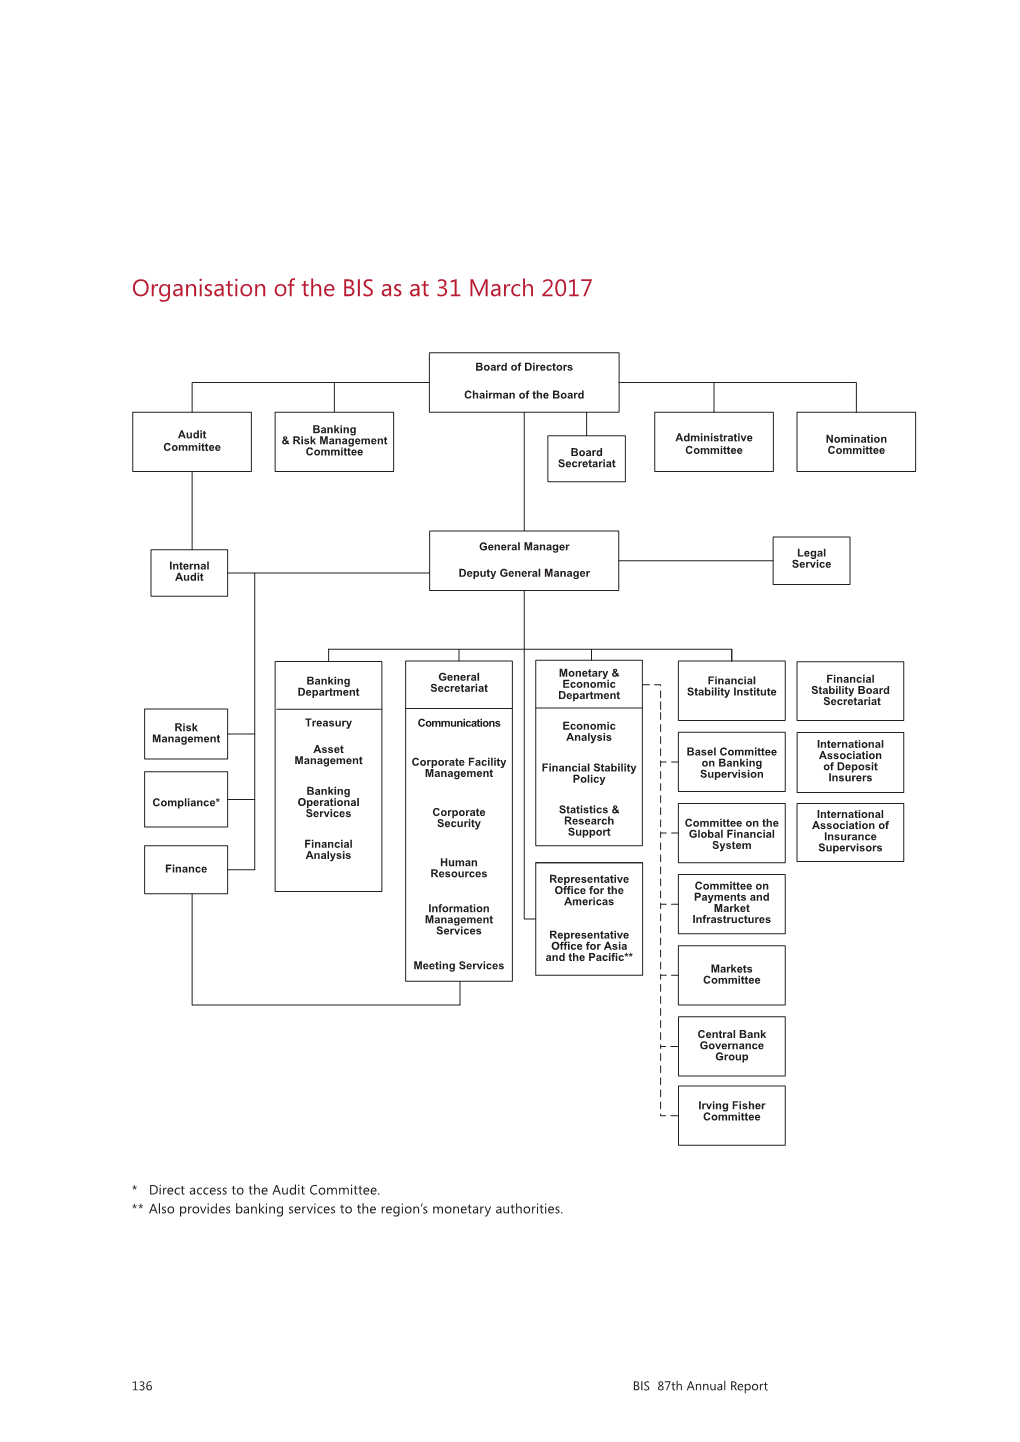 The BIS: Mission, Activities, Governance and Financial Results